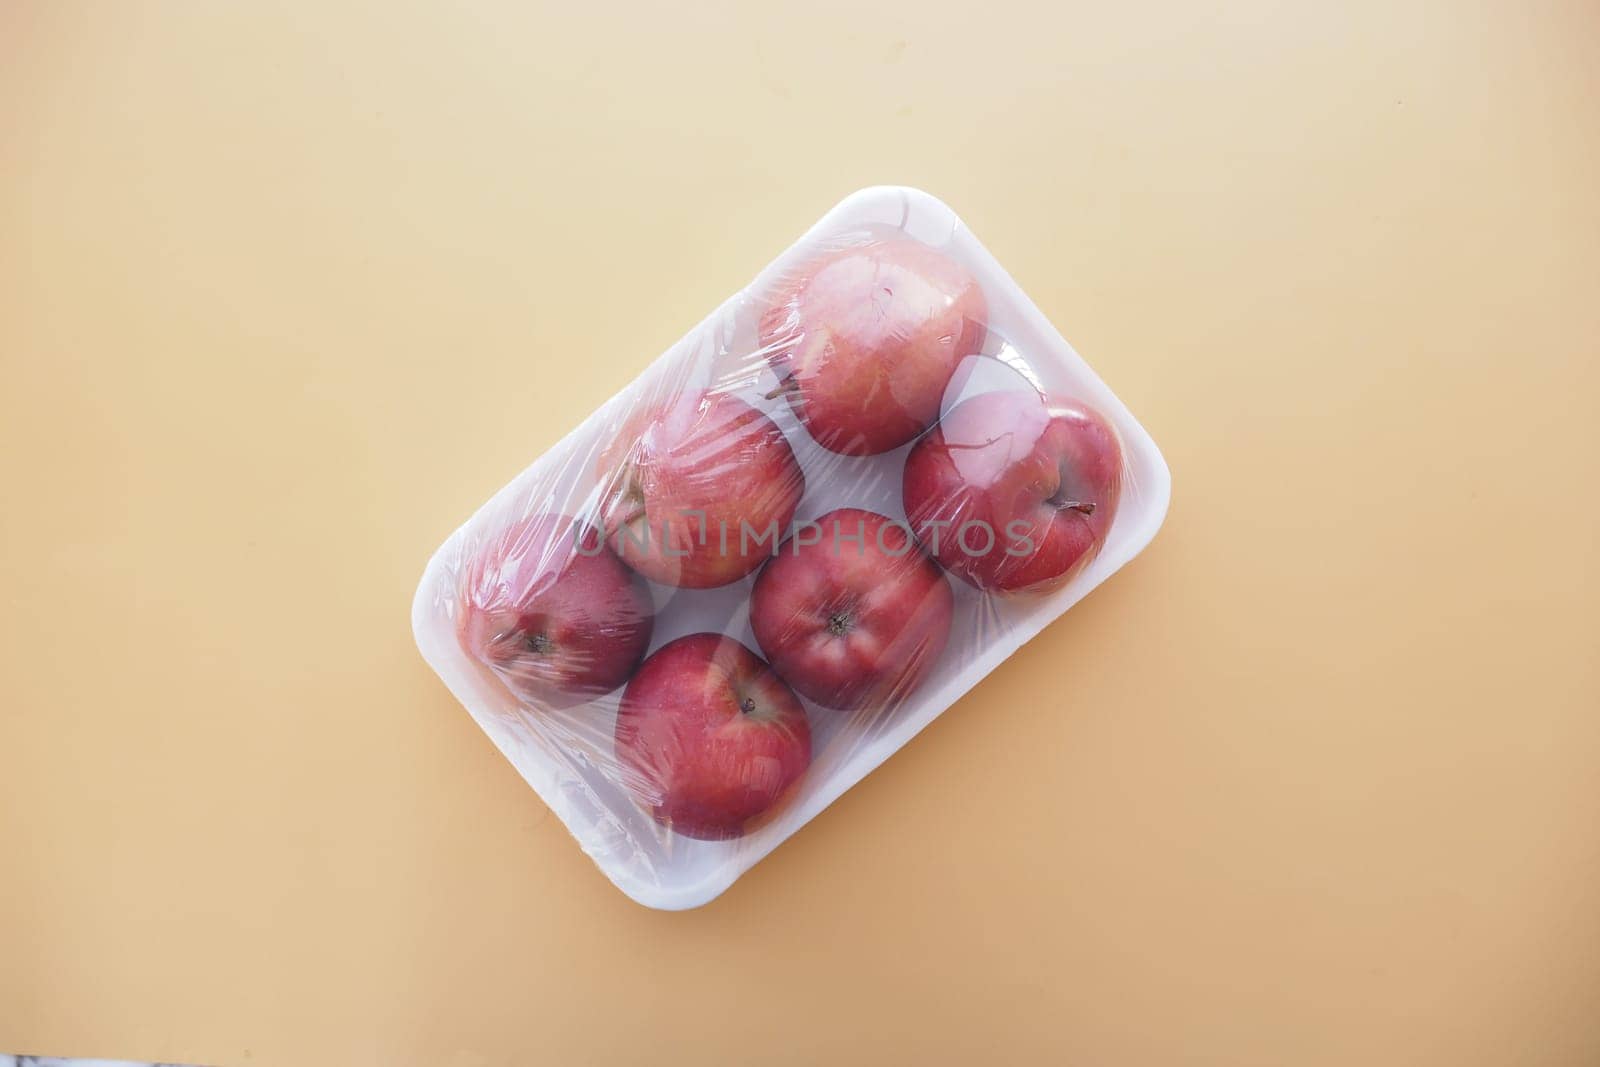 apples wrapped in transparent plastic. by towfiq007